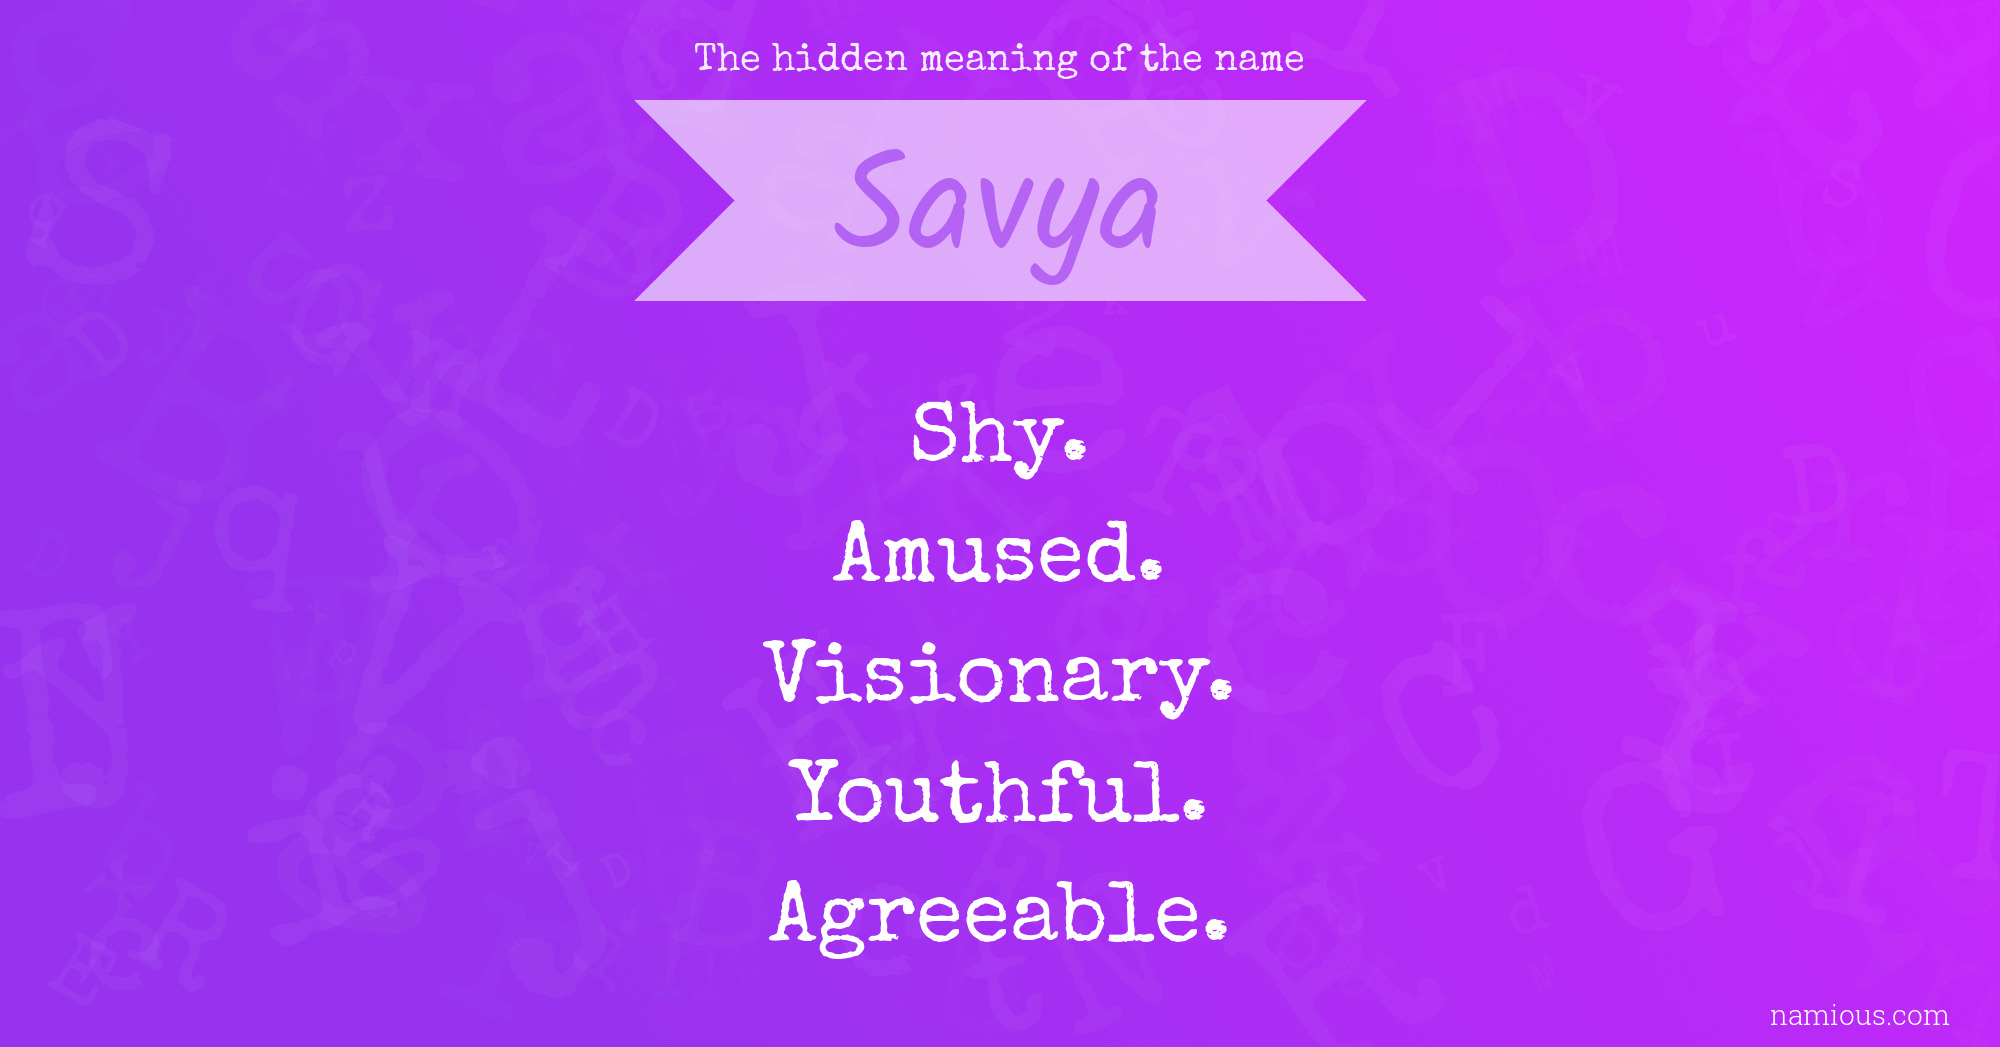 The hidden meaning of the name Savya